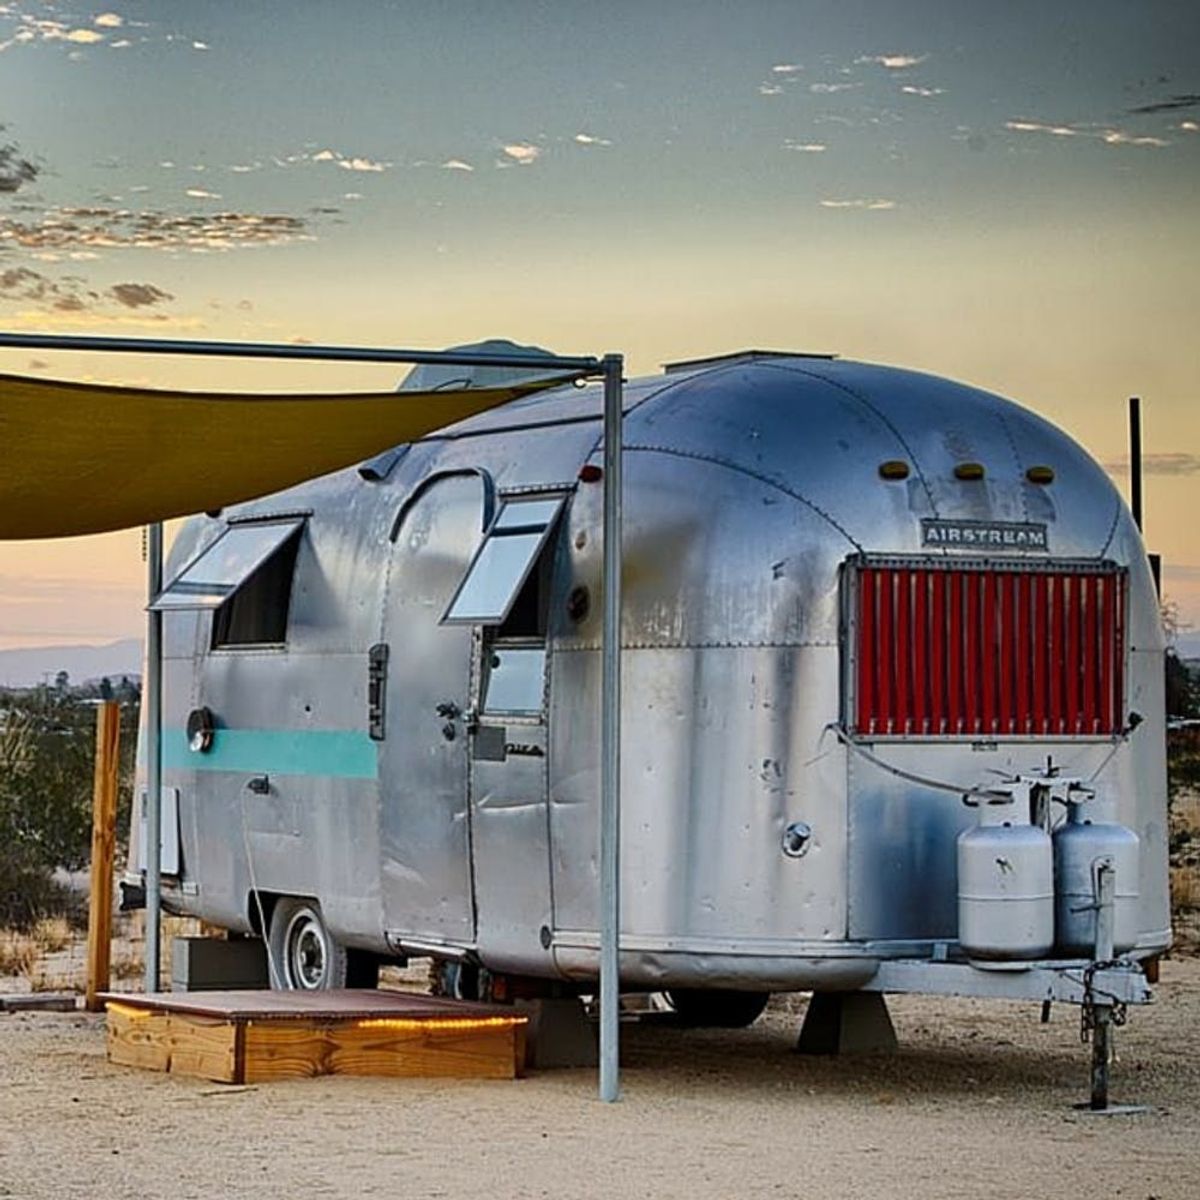 10 Airstreams That Take Glamping to a Whole New Level